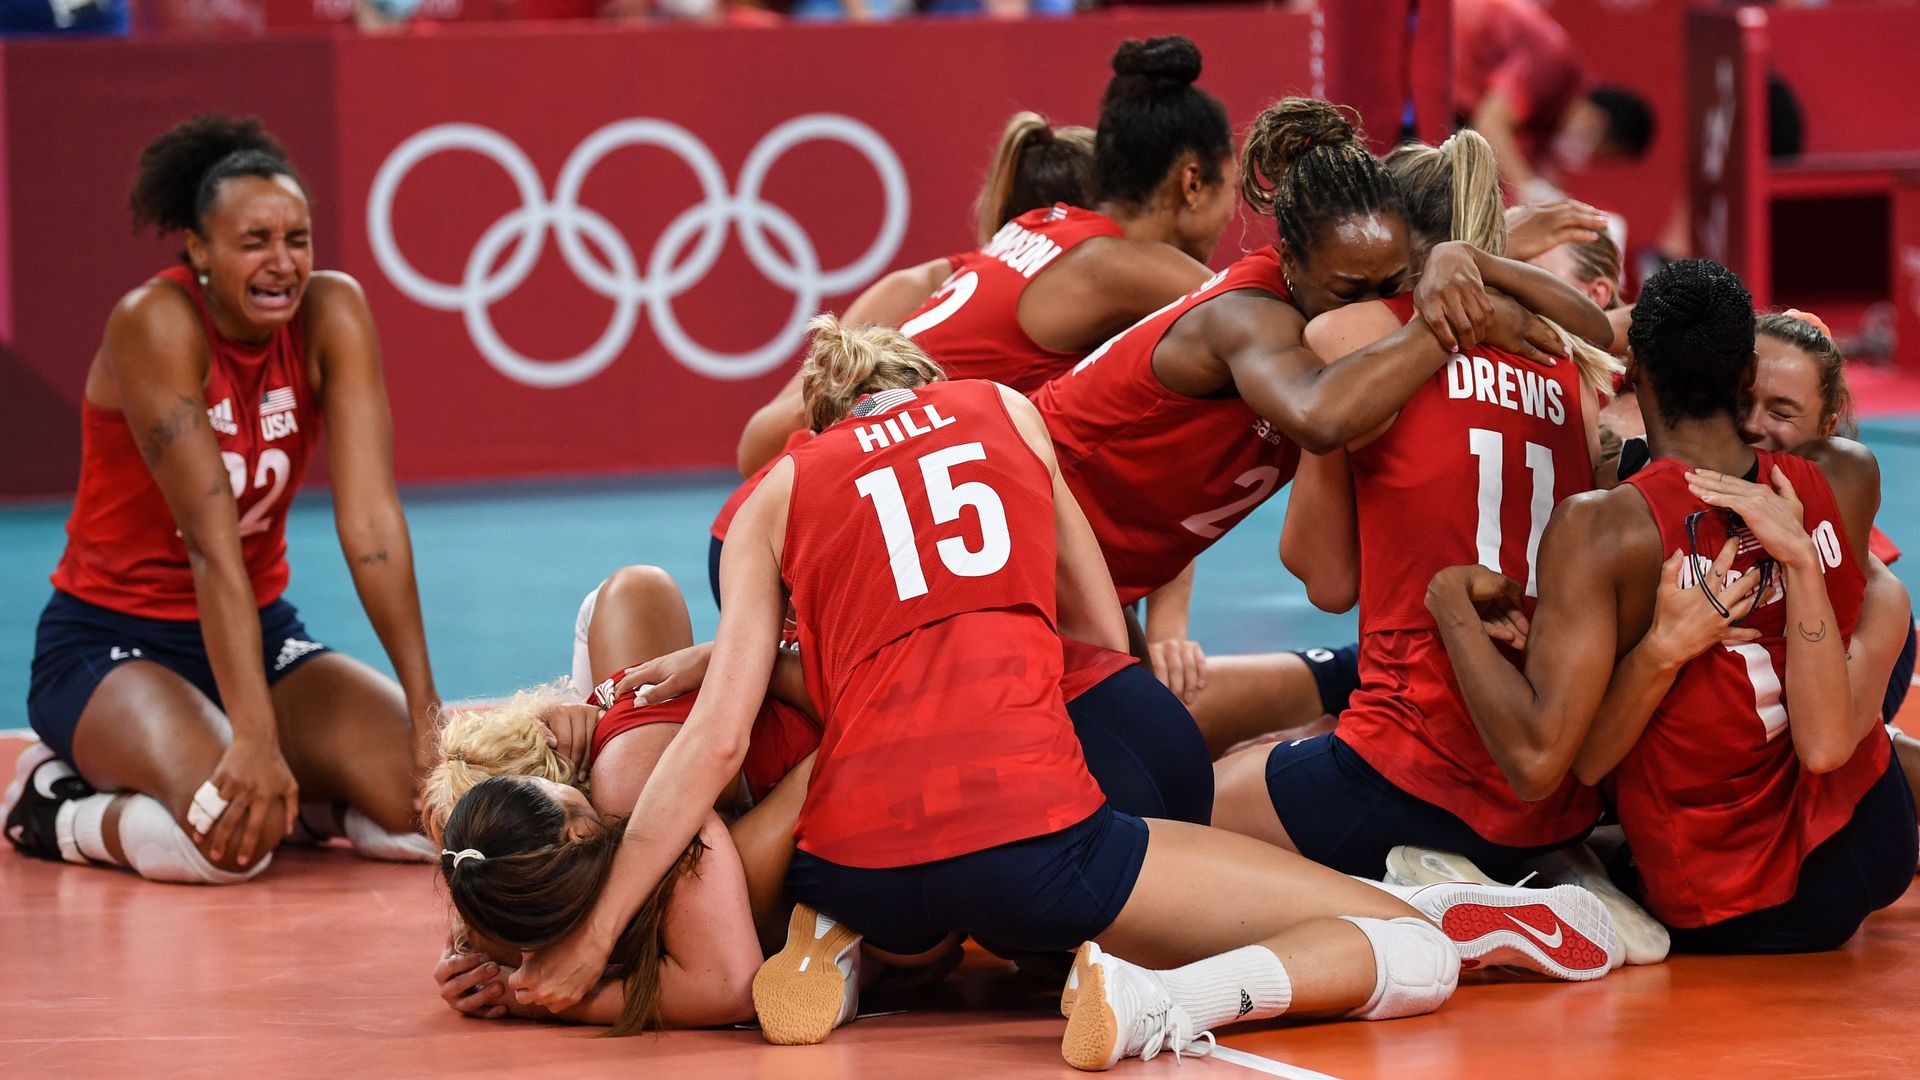 USA's players celebrate their victory in the women's gold medal volleyball match between Brazil and USA during the Tokyo 2020 Olympic Games at Ariake Arena in Tokyo on August 8